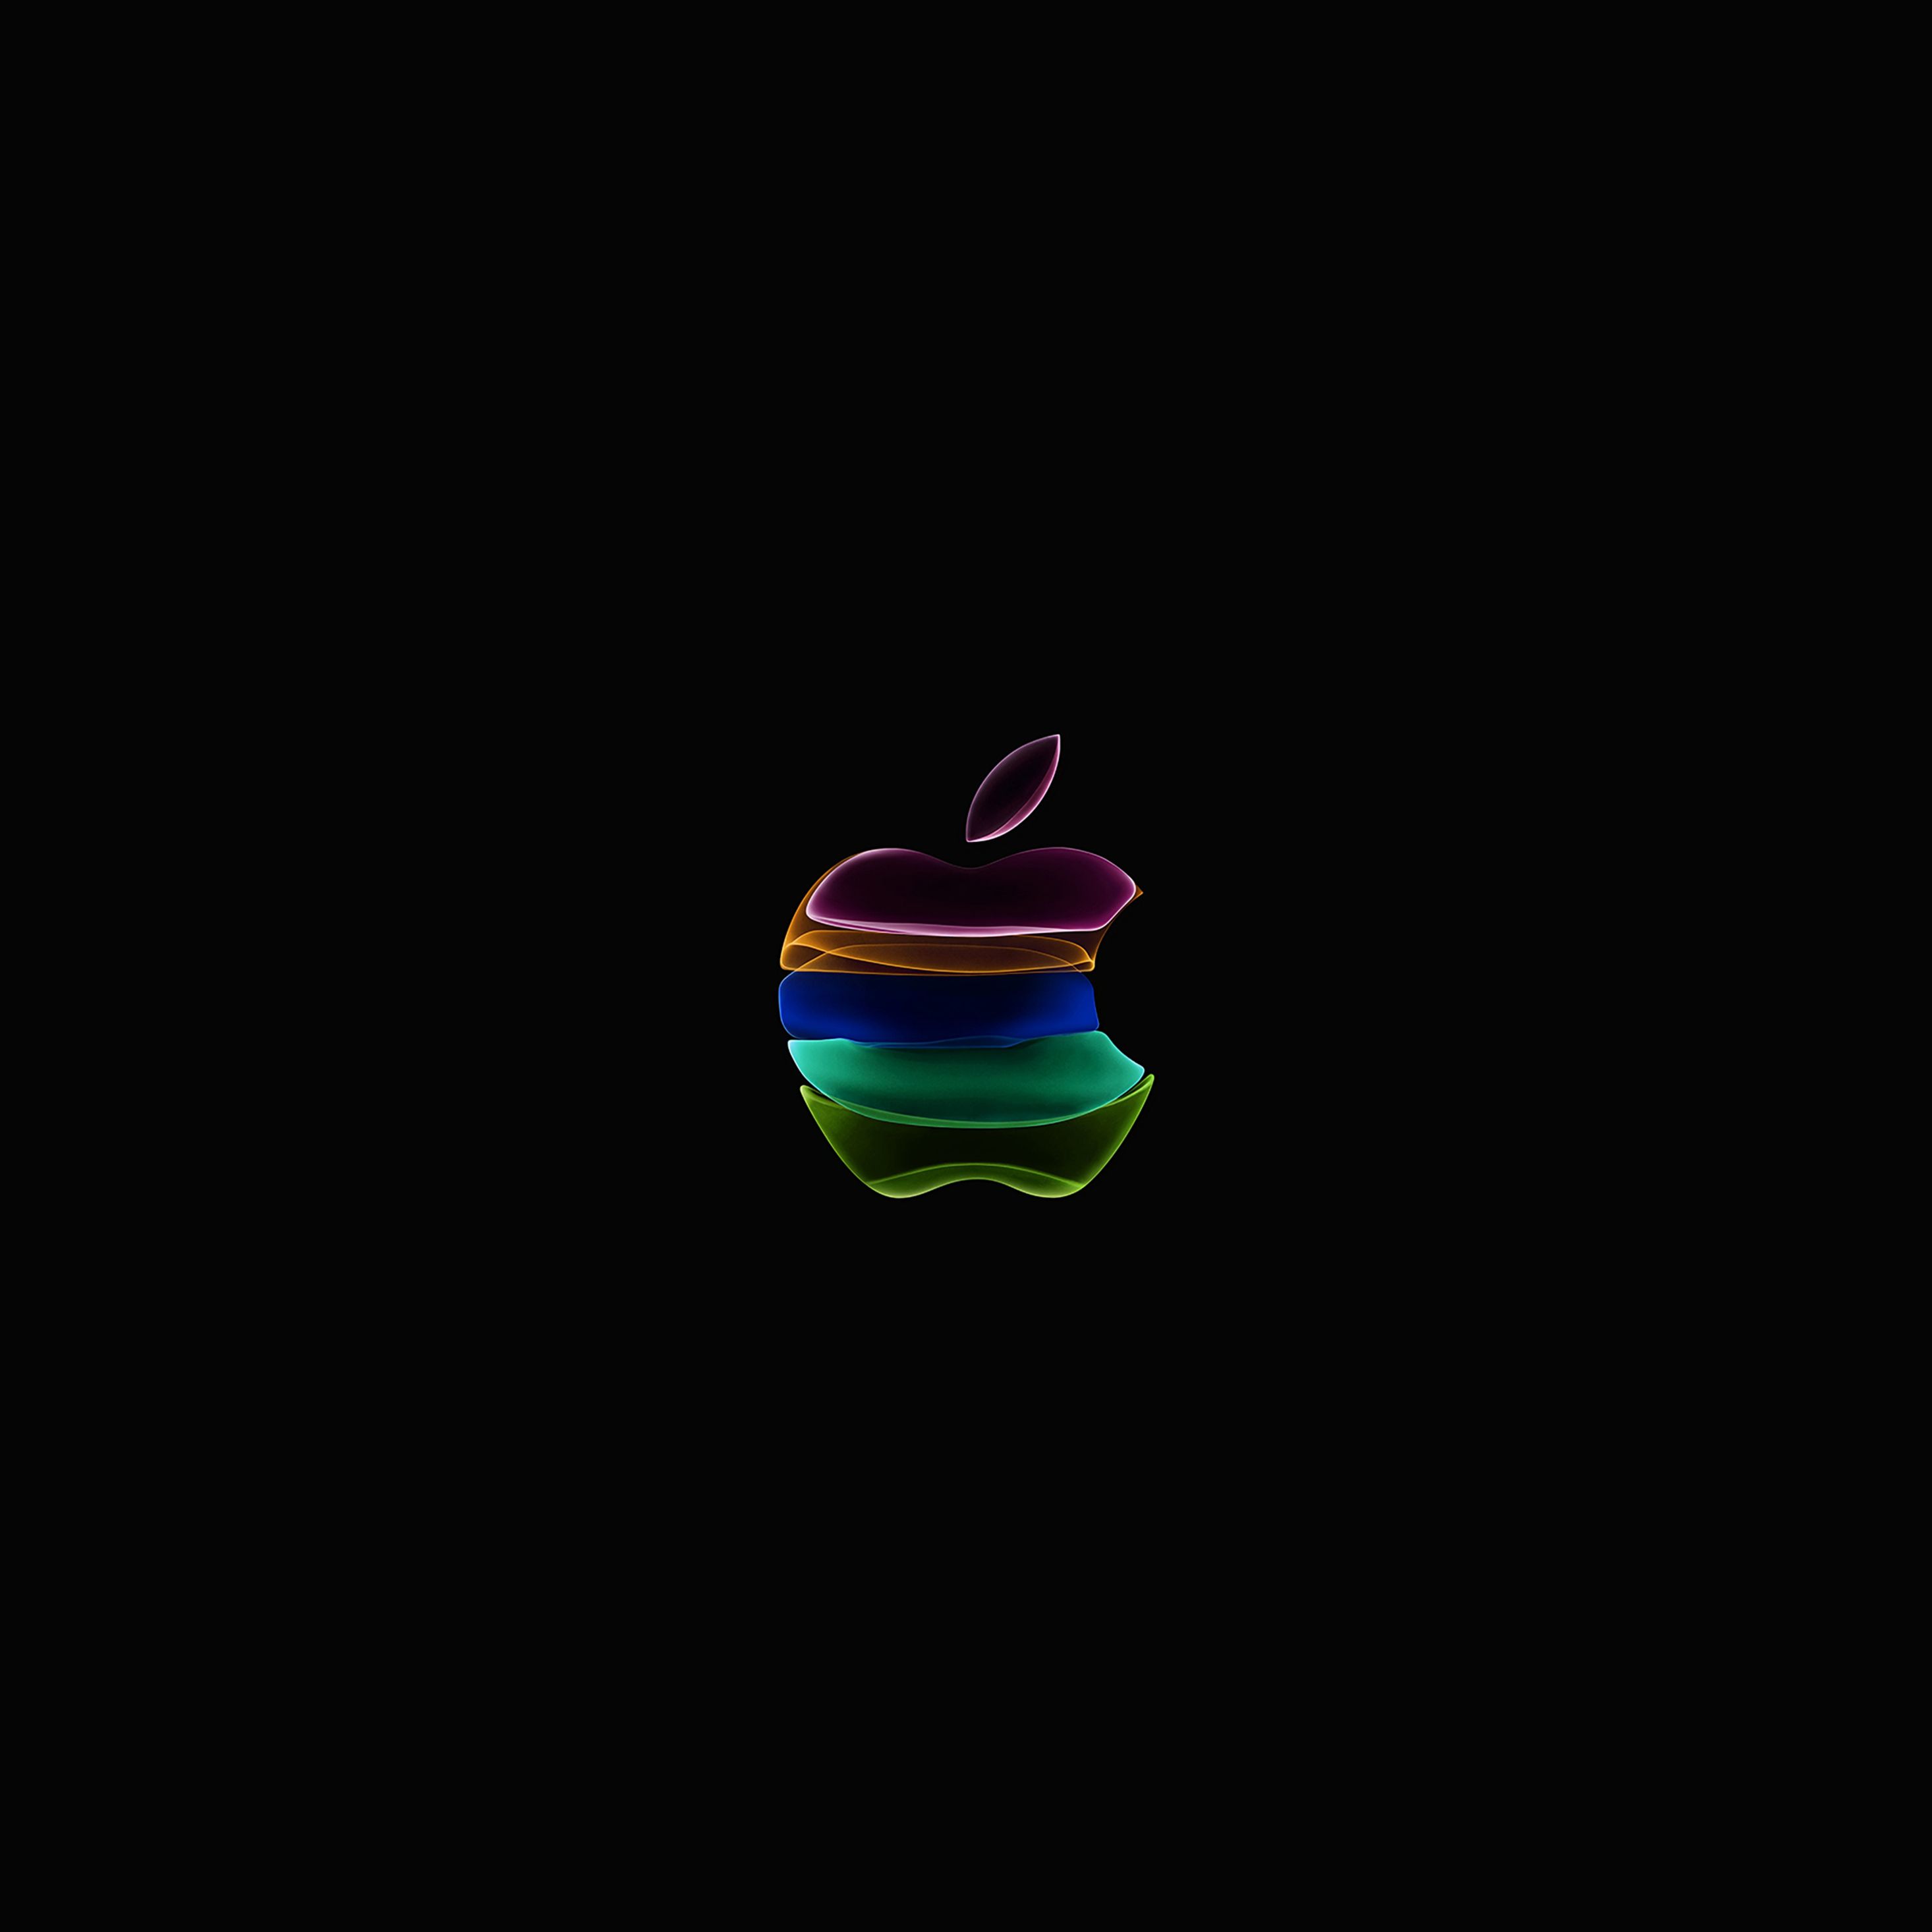 iPhone 11 Event Logo 4k iPad Pro Retina Display HD 4k Wallpaper, Image, Background, Photo and Picture